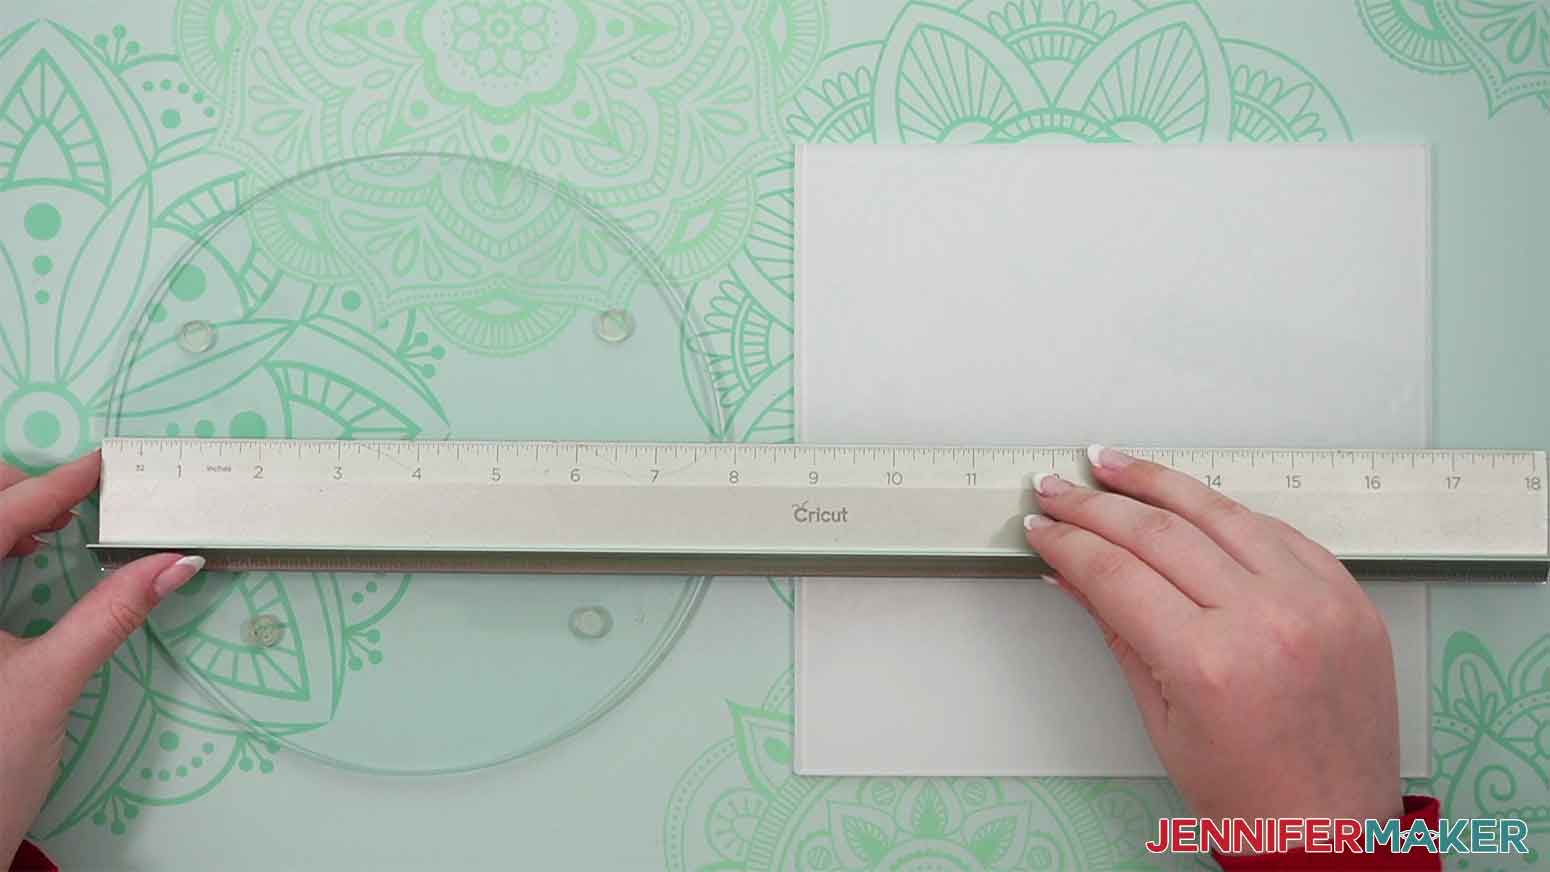 It's best to measure each blank, just in case yours is a different size than the one we used.